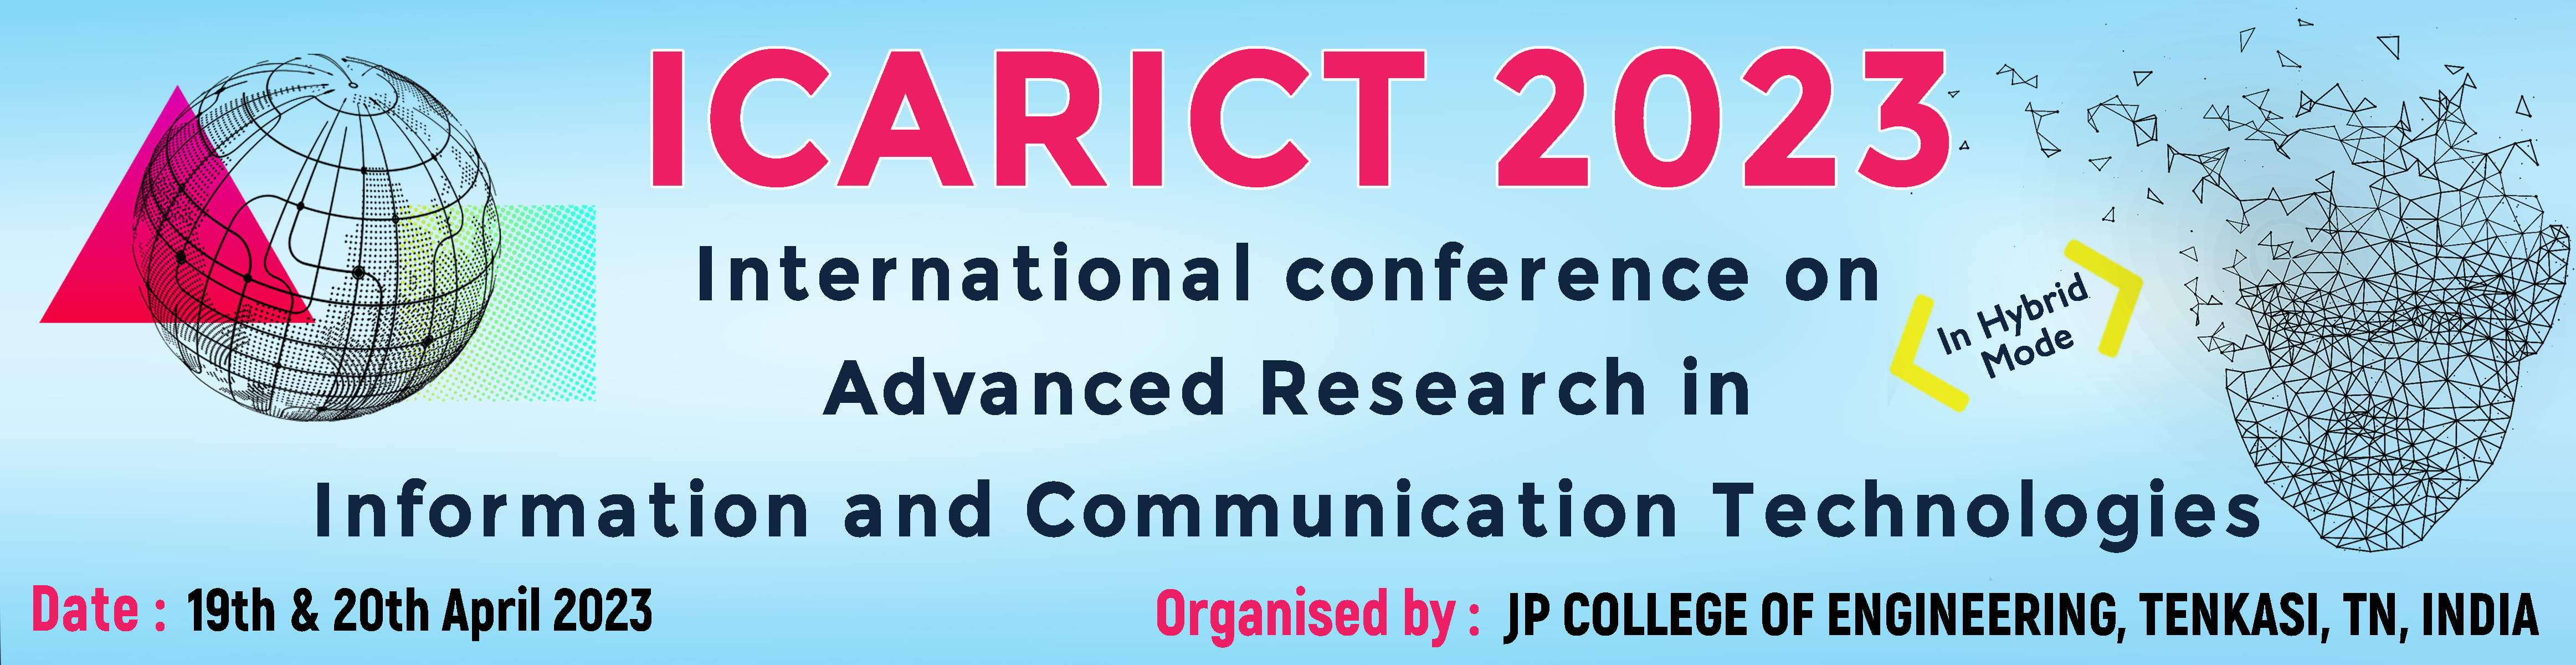 International Conference on Advanced Research in Information and Communication Technologies - ICARICT 2023